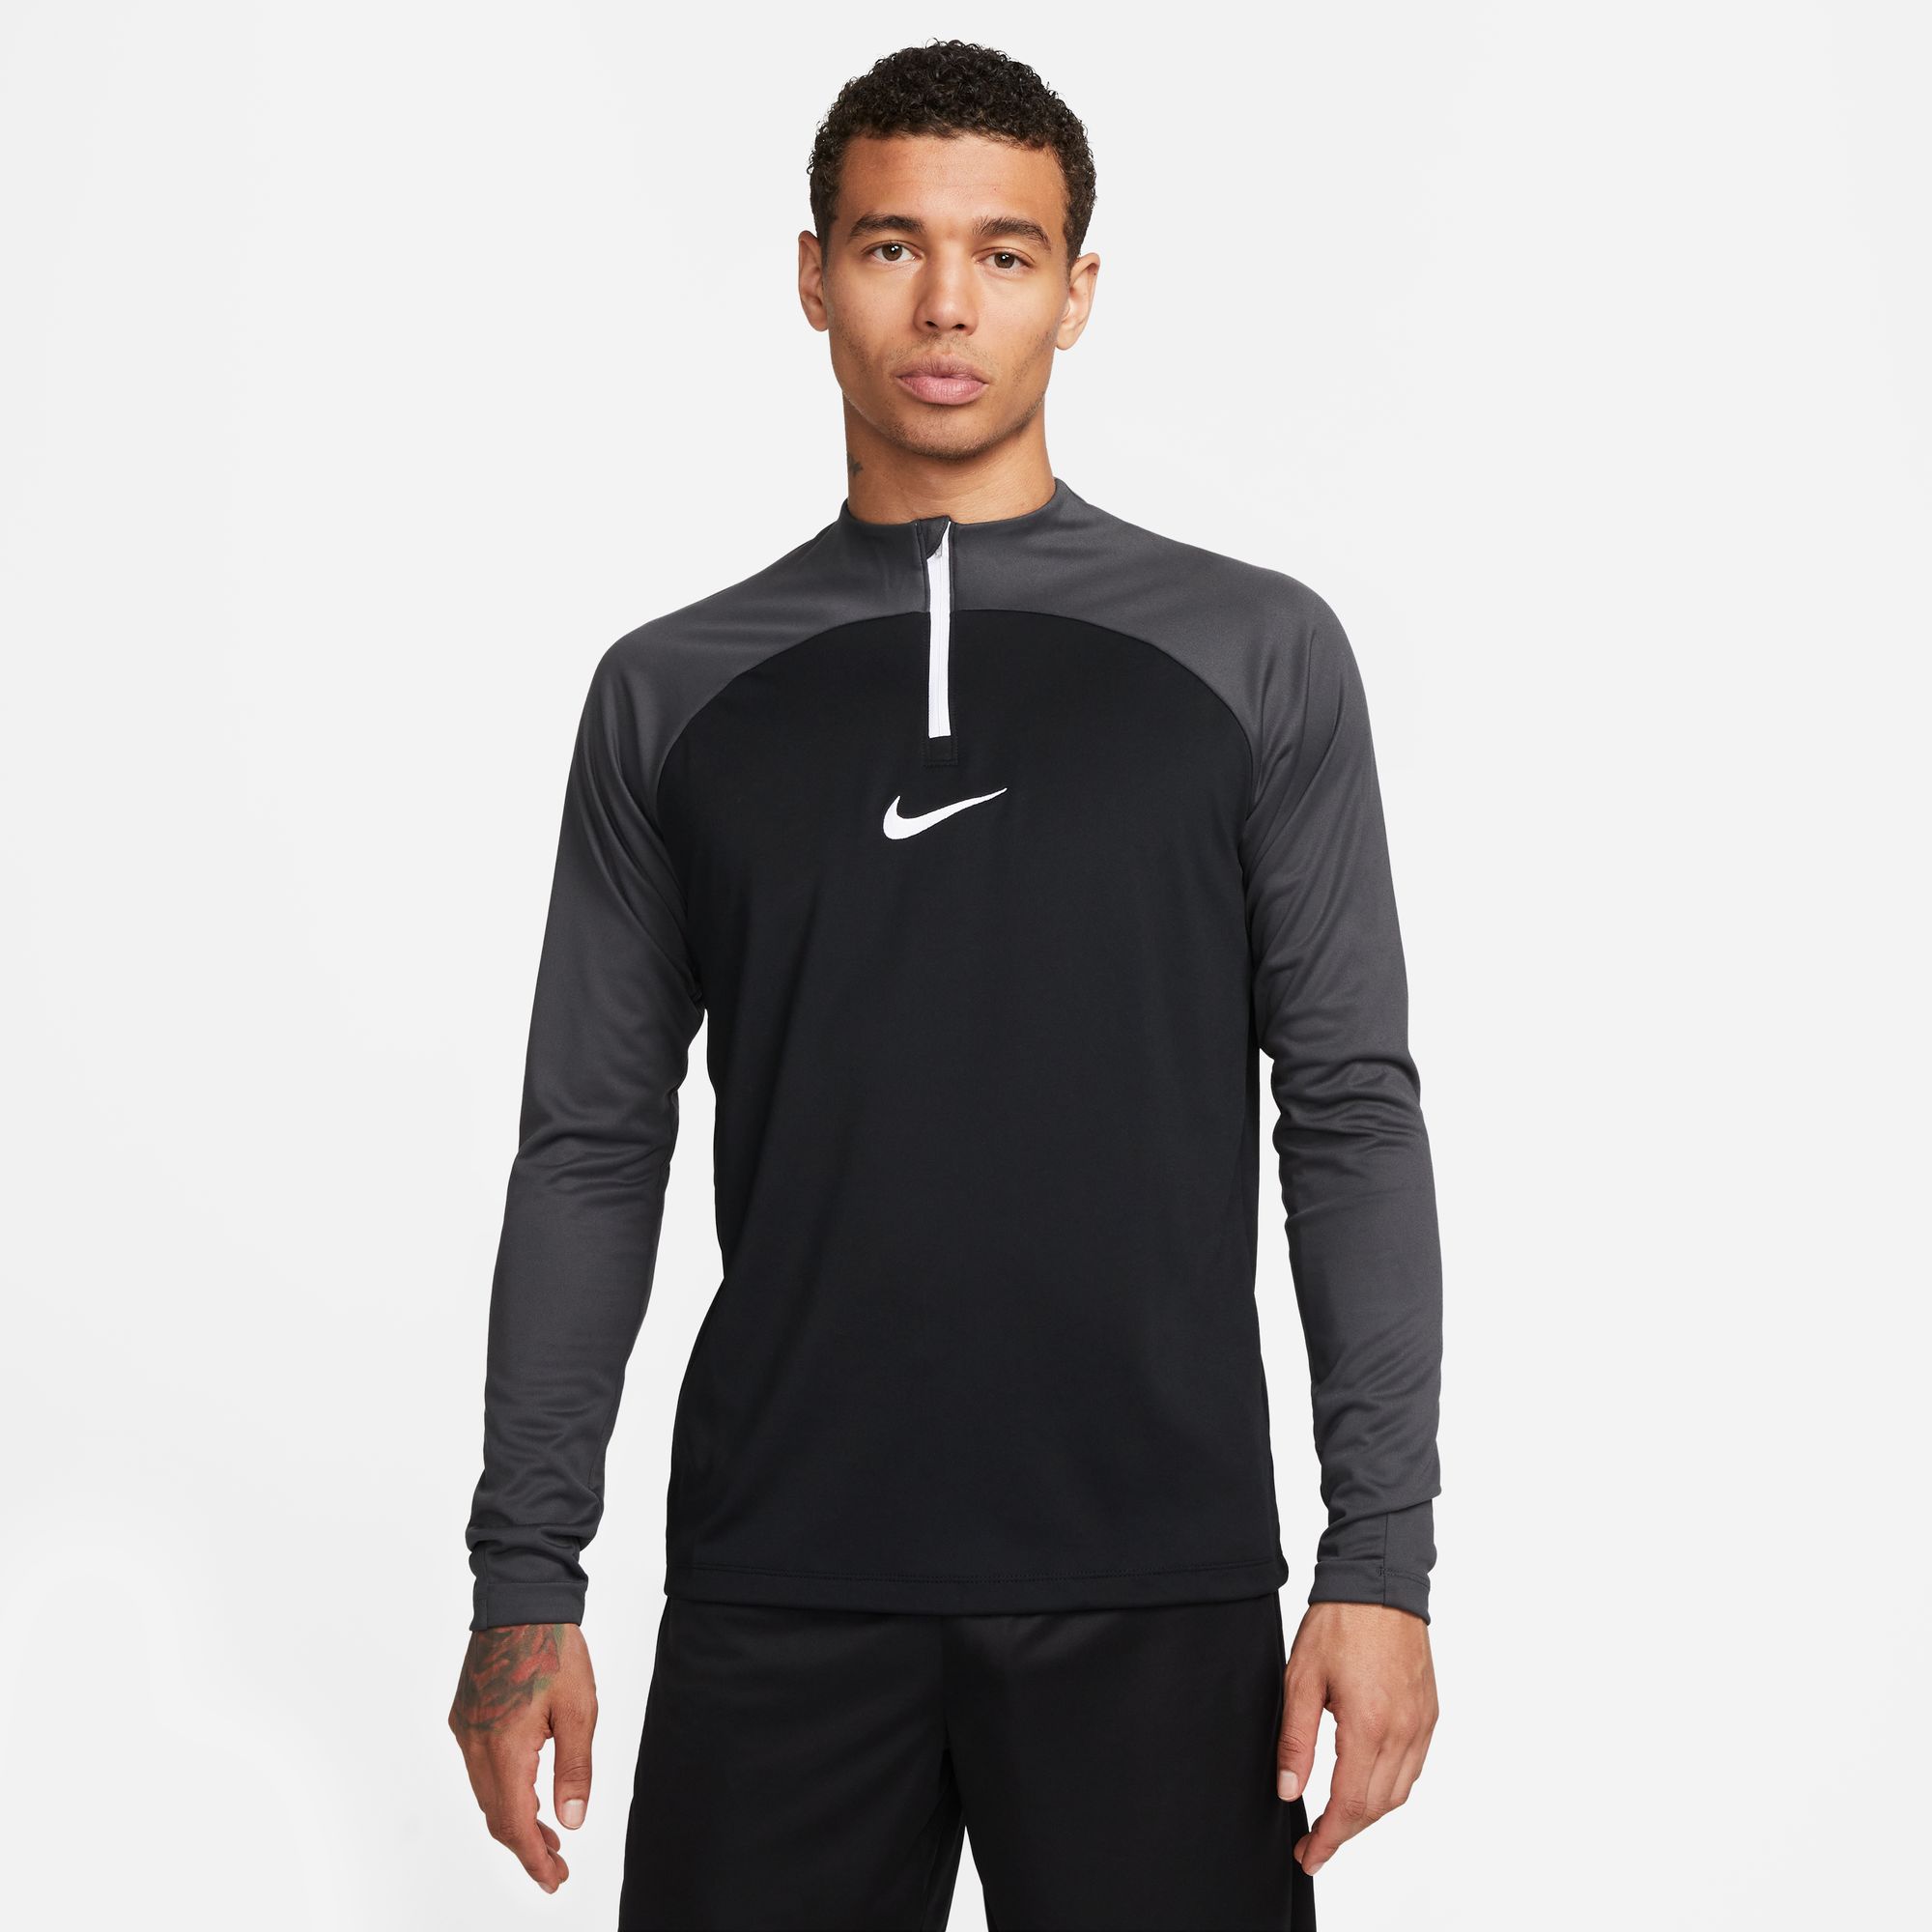 Nike Dri-FIT Academy Pro Long Sleeve Drill Top